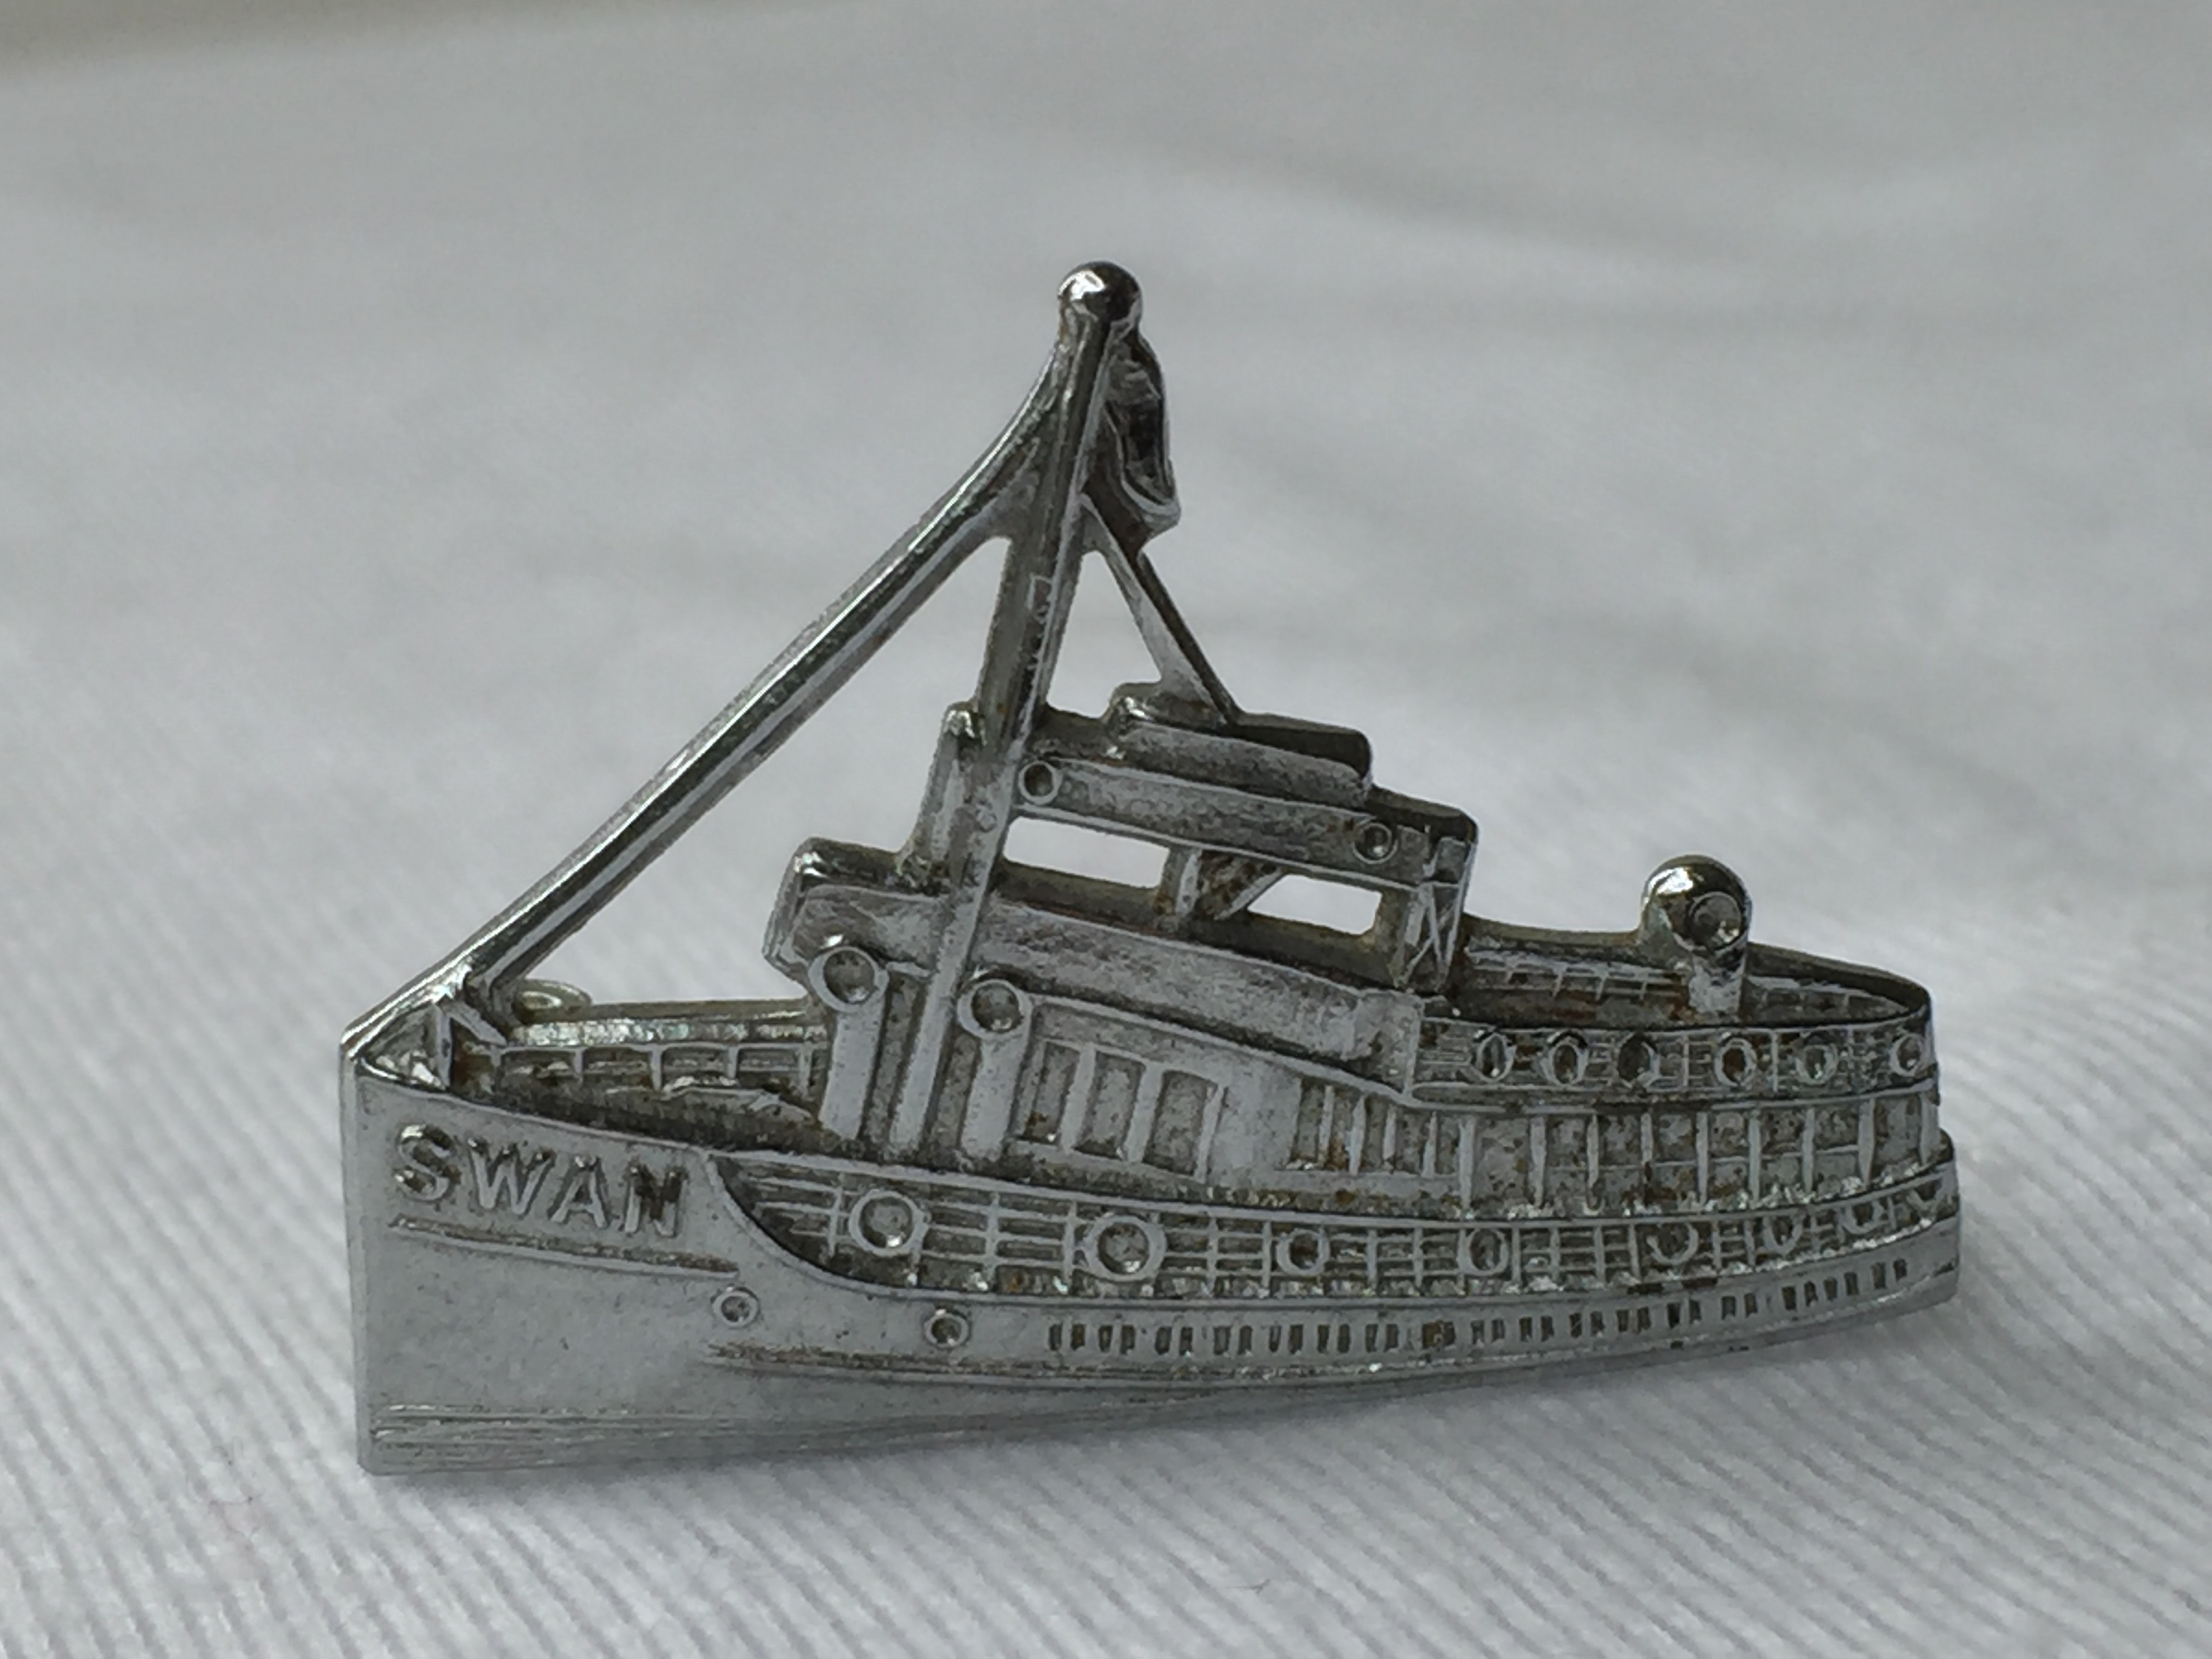 SHIP SHAPE LAPEL PIN FROM THE FERRY CROSSING SERVICE VESSEL THE SWAN 